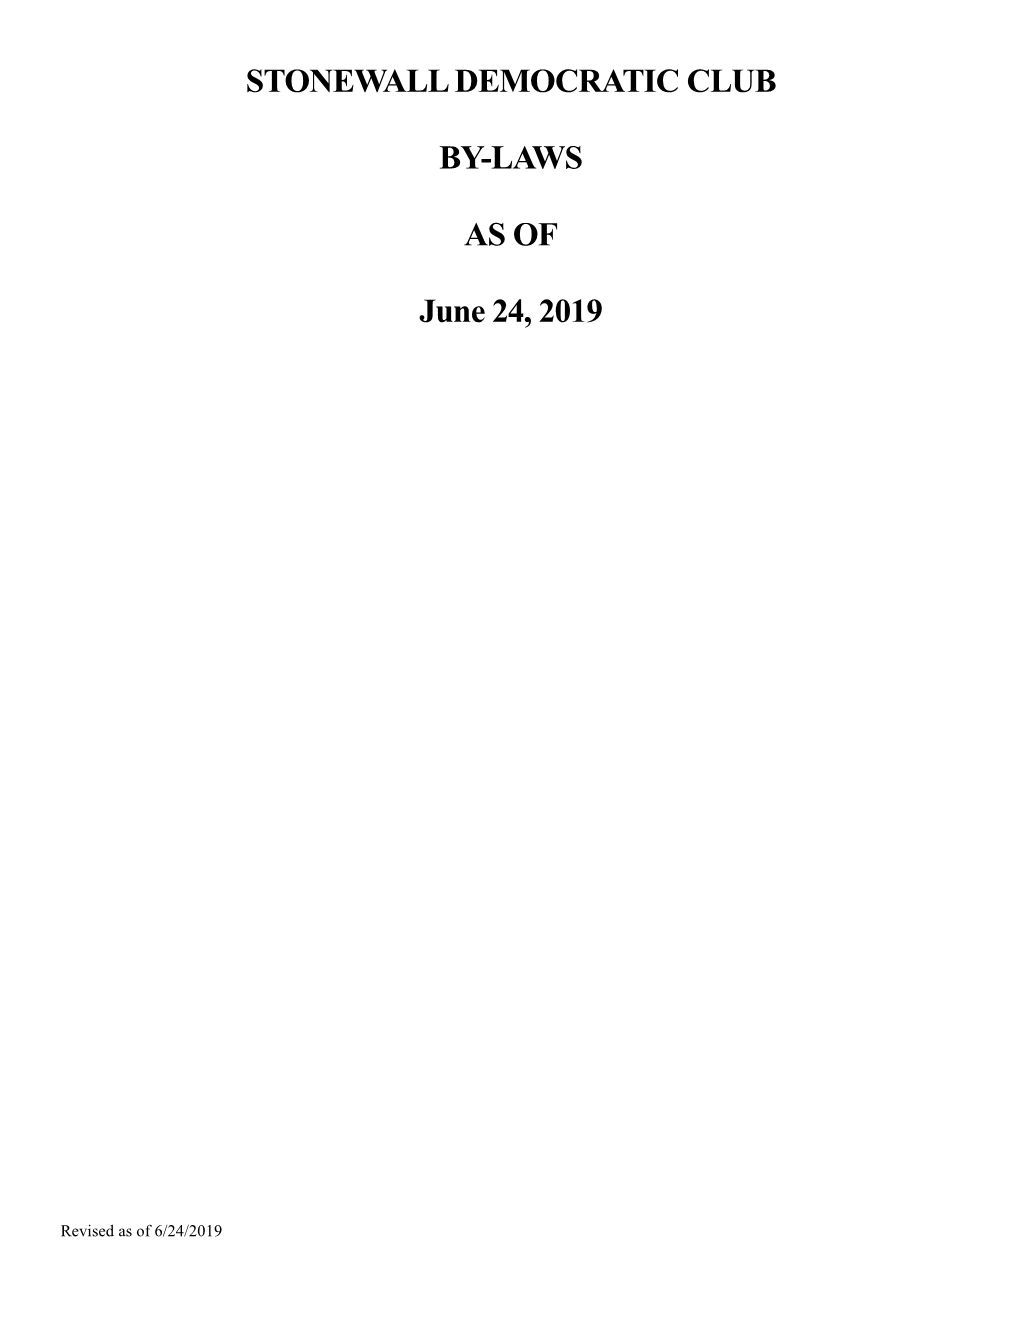 STONEWALL DEMOCRATIC CLUB BY-LAWS AS of June 24, 2019